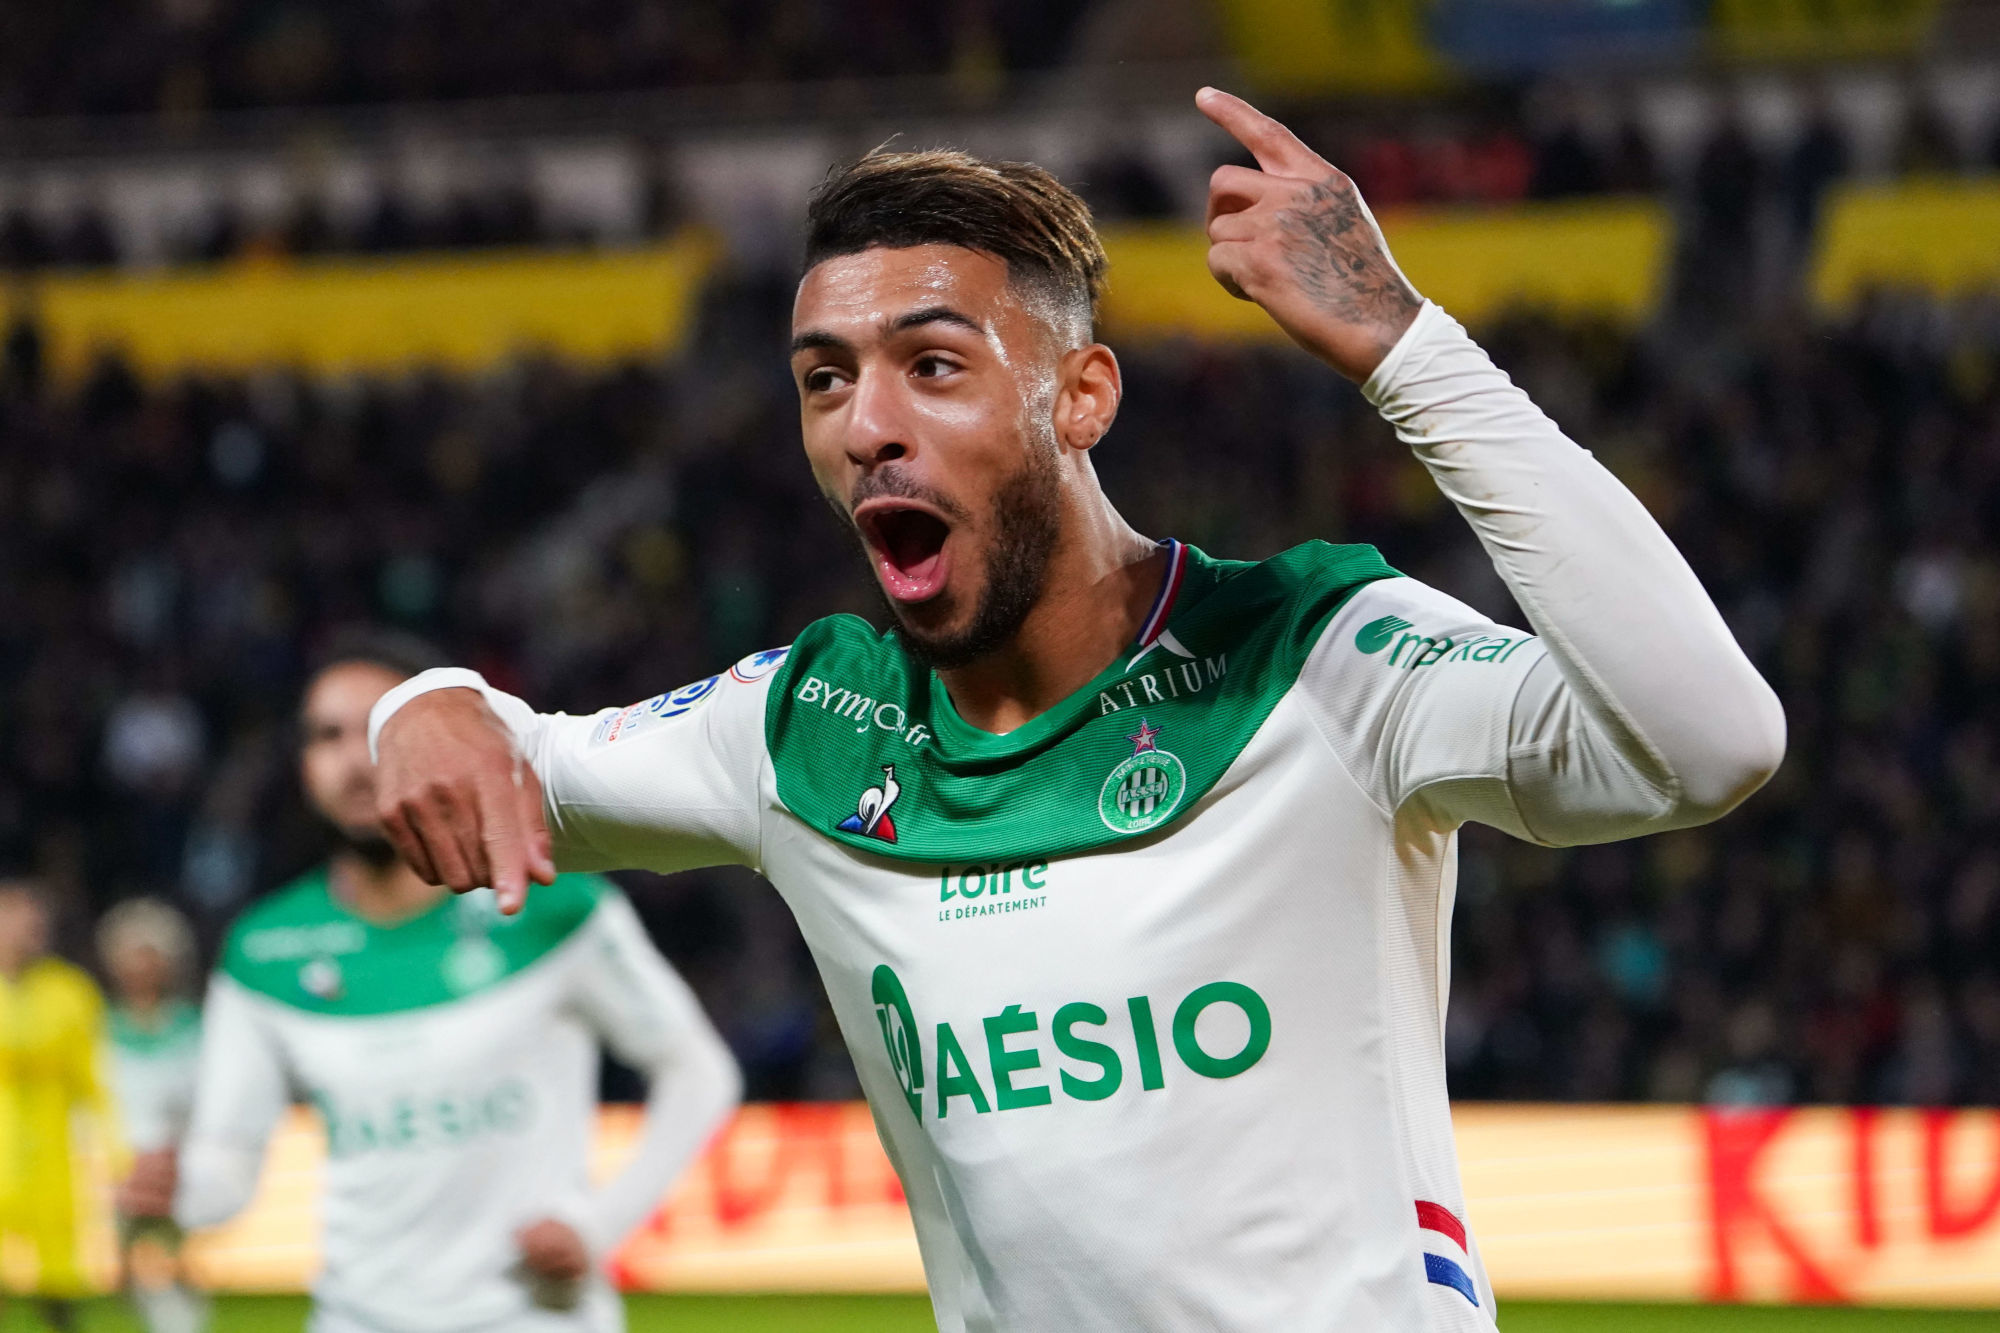 Denis BOUANGA of Saint Etienne celebrates after scoring a goal during the Ligue 1 match between Nantes and Saint Etienne at Stade de la Beaujoire on November 10, 2019 in Nantes, France. (Photo by Eddy Lemaistre/Icon Sport) - Denis BOUANGA - Stade de La Beaujoire - Louis Fonteneau - Nantes (France)